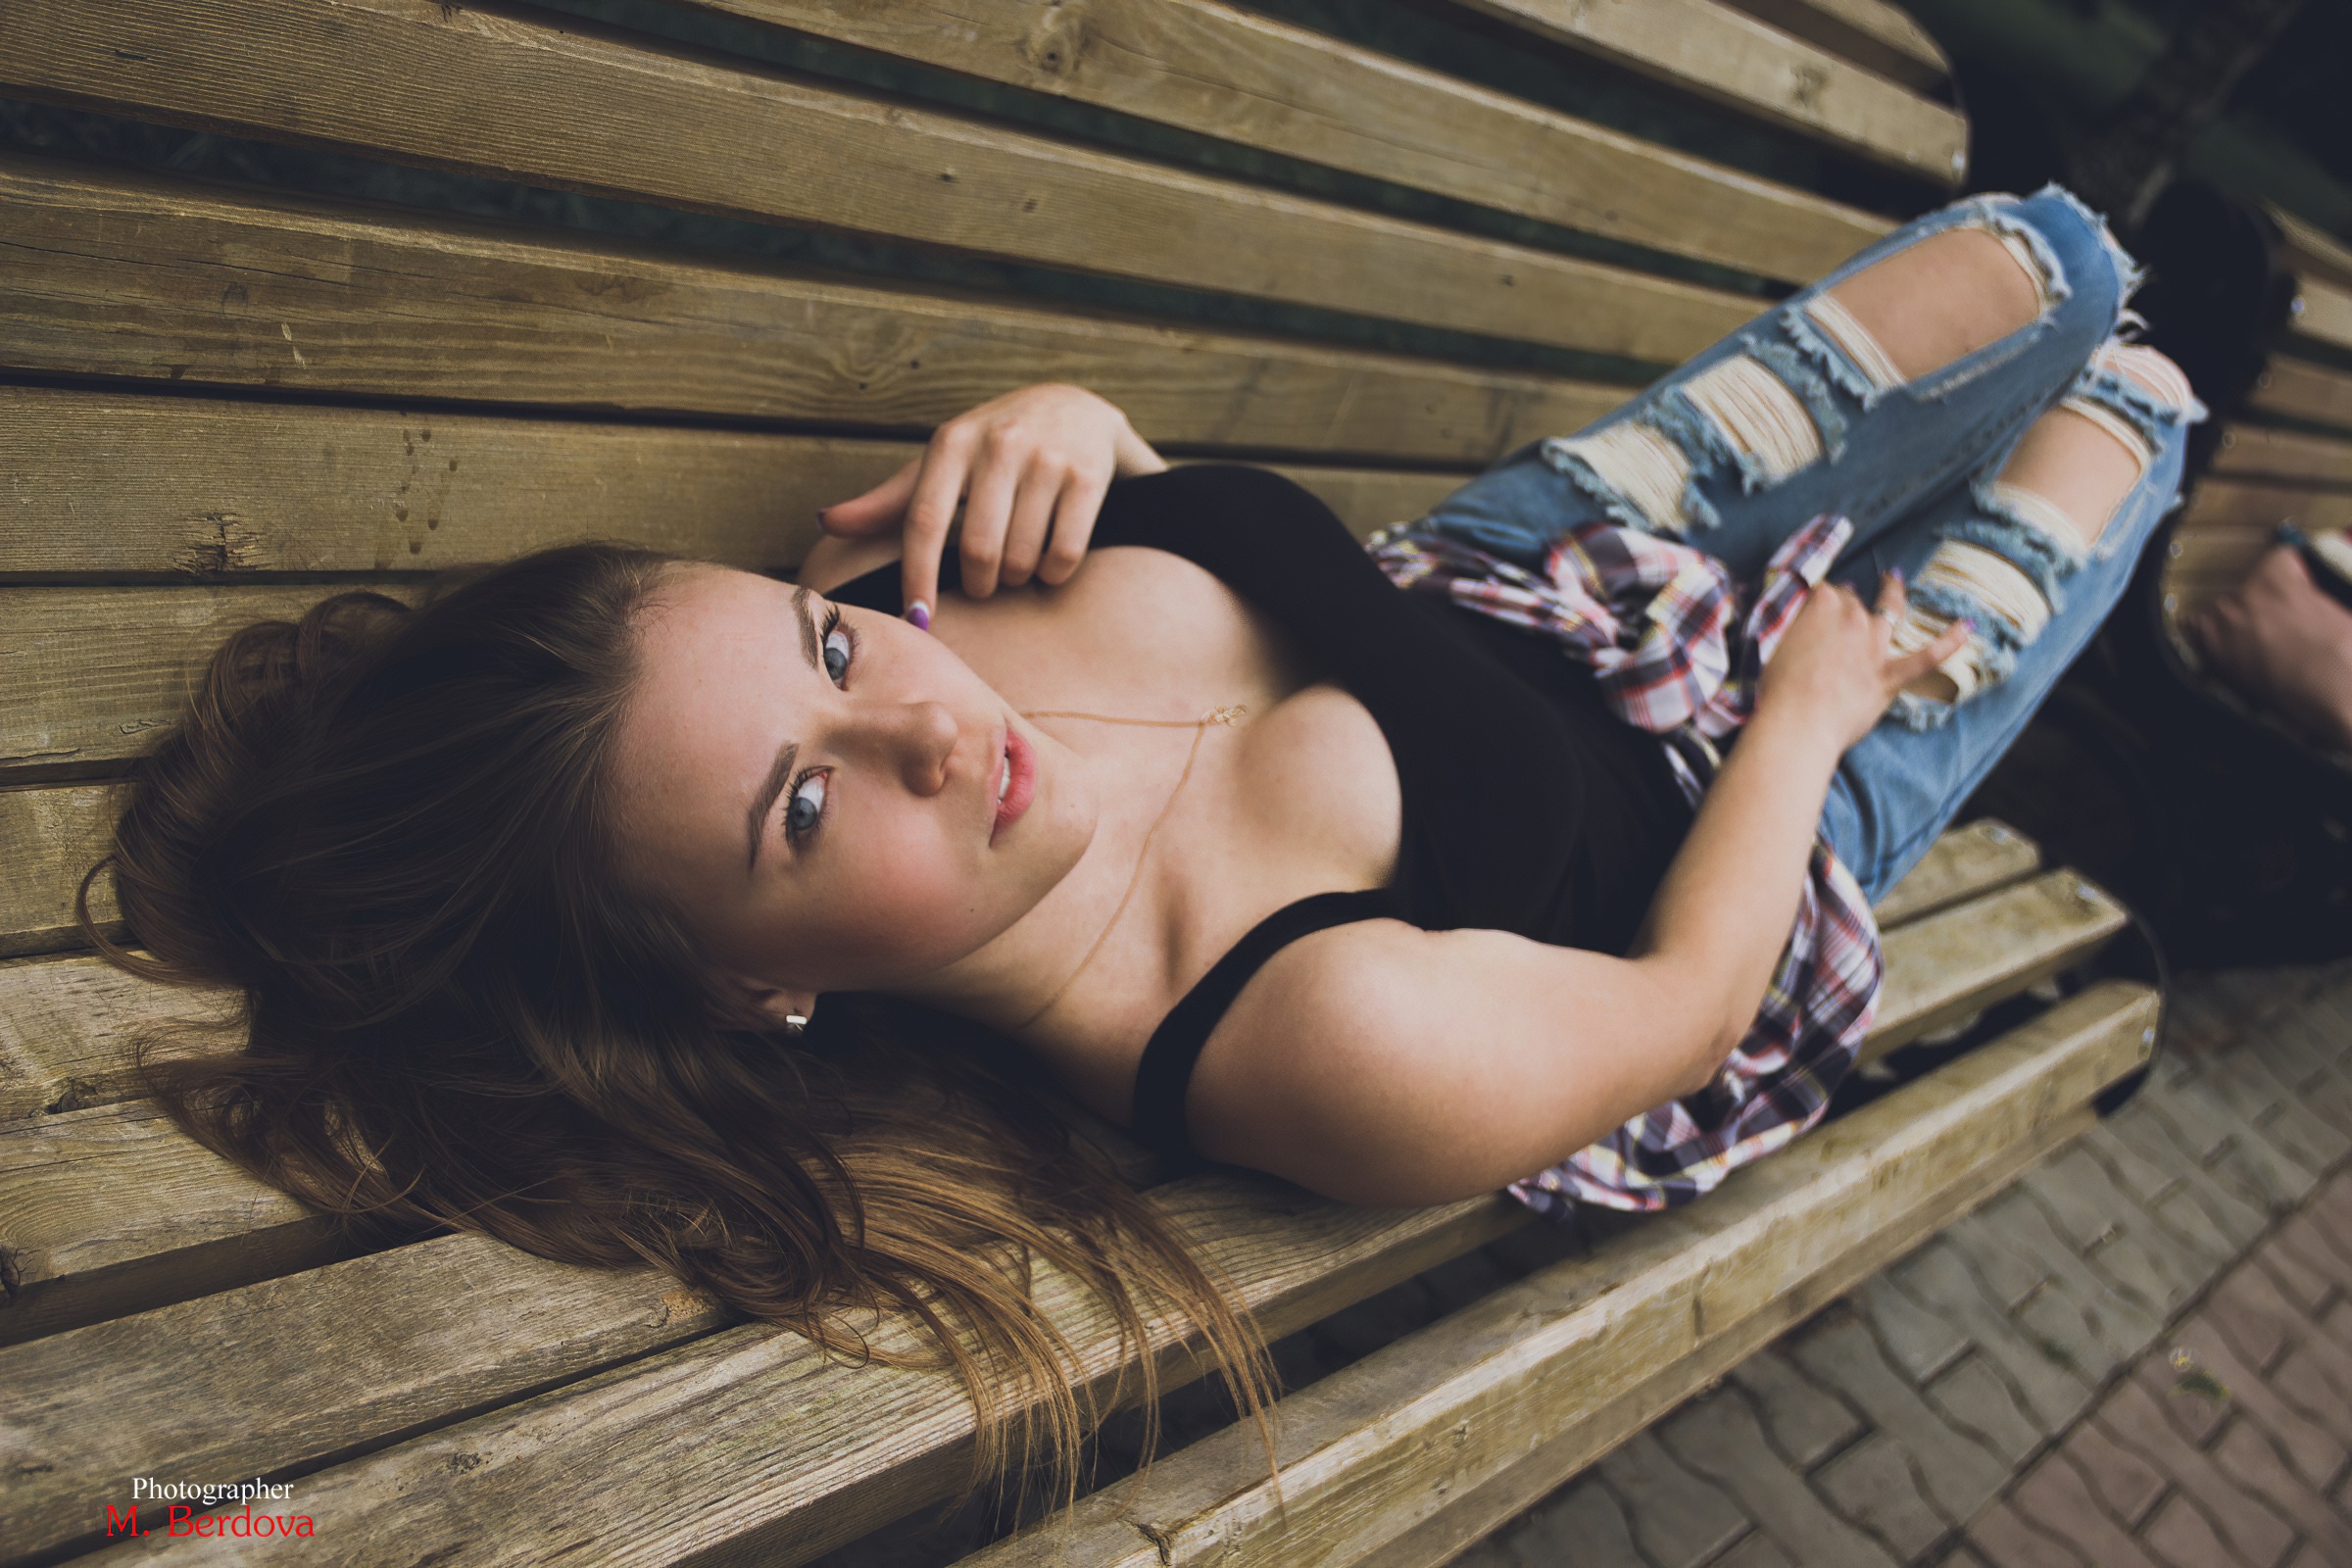 People 2400x1600 women model red lipstick black top cleavage jeans lying down looking at viewer women outdoors